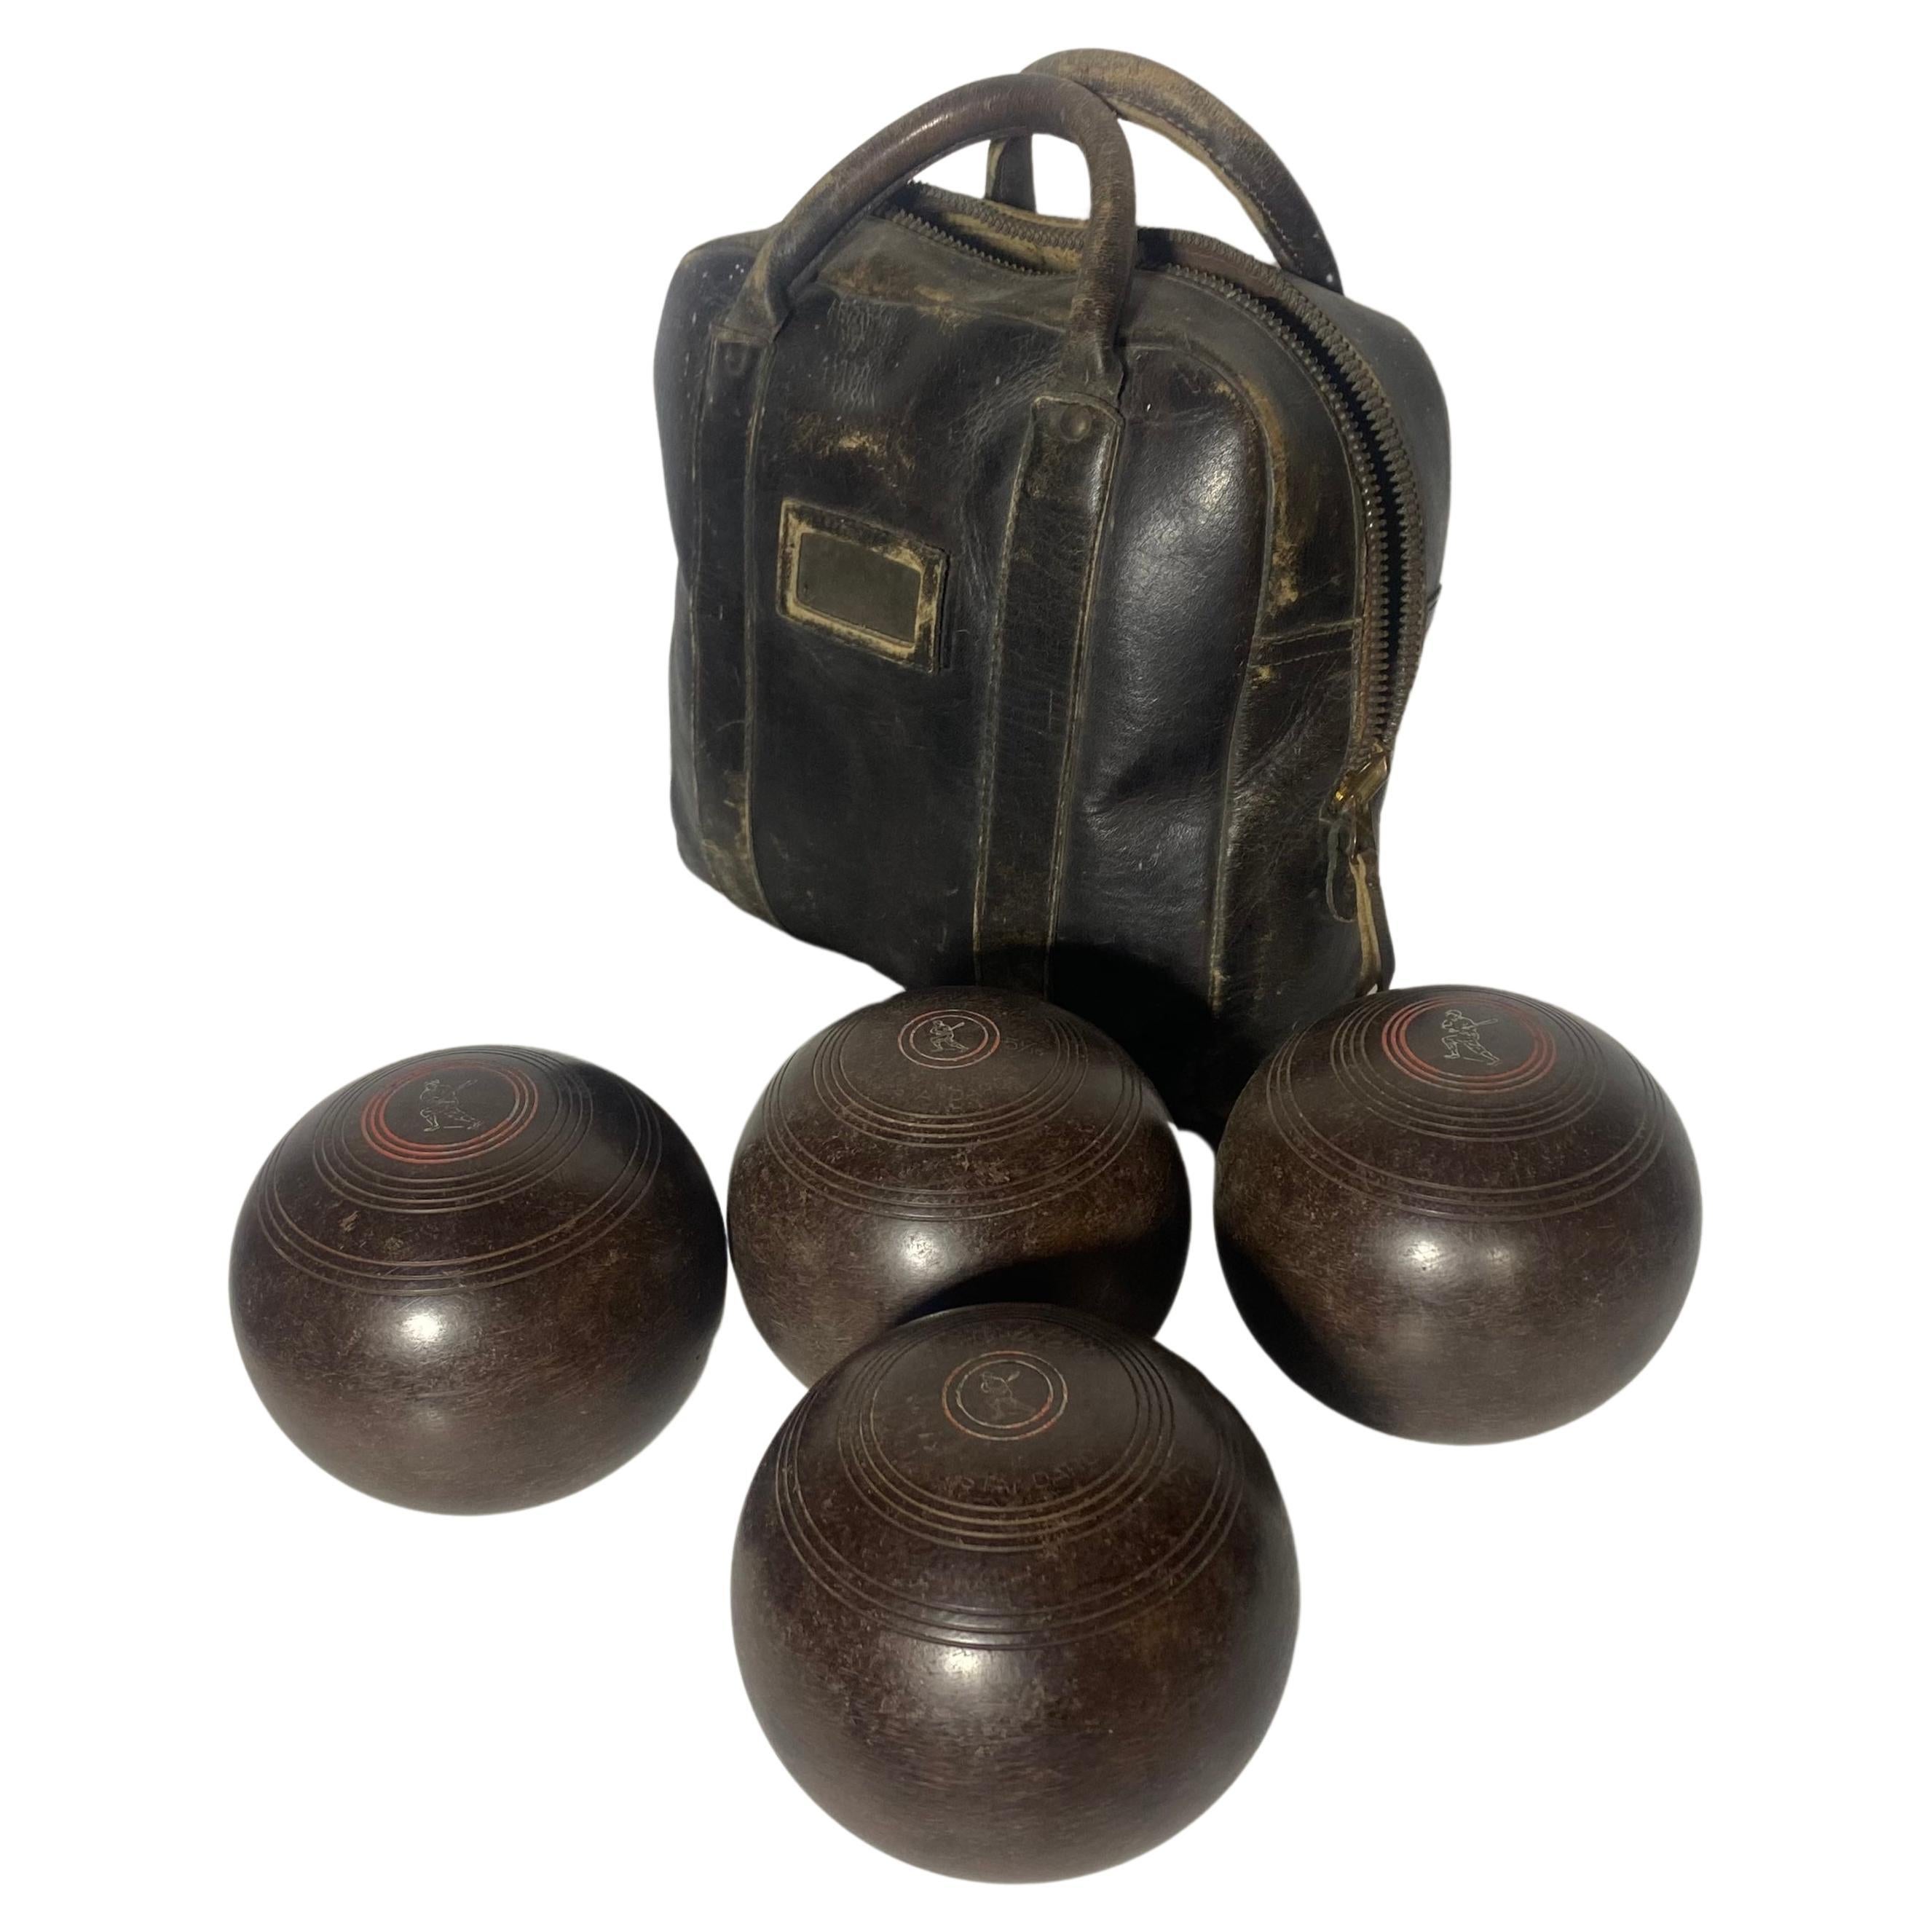 1930s /40s W.D. Hensell & Sons Bocci (Lawn) Balls with original leather bag